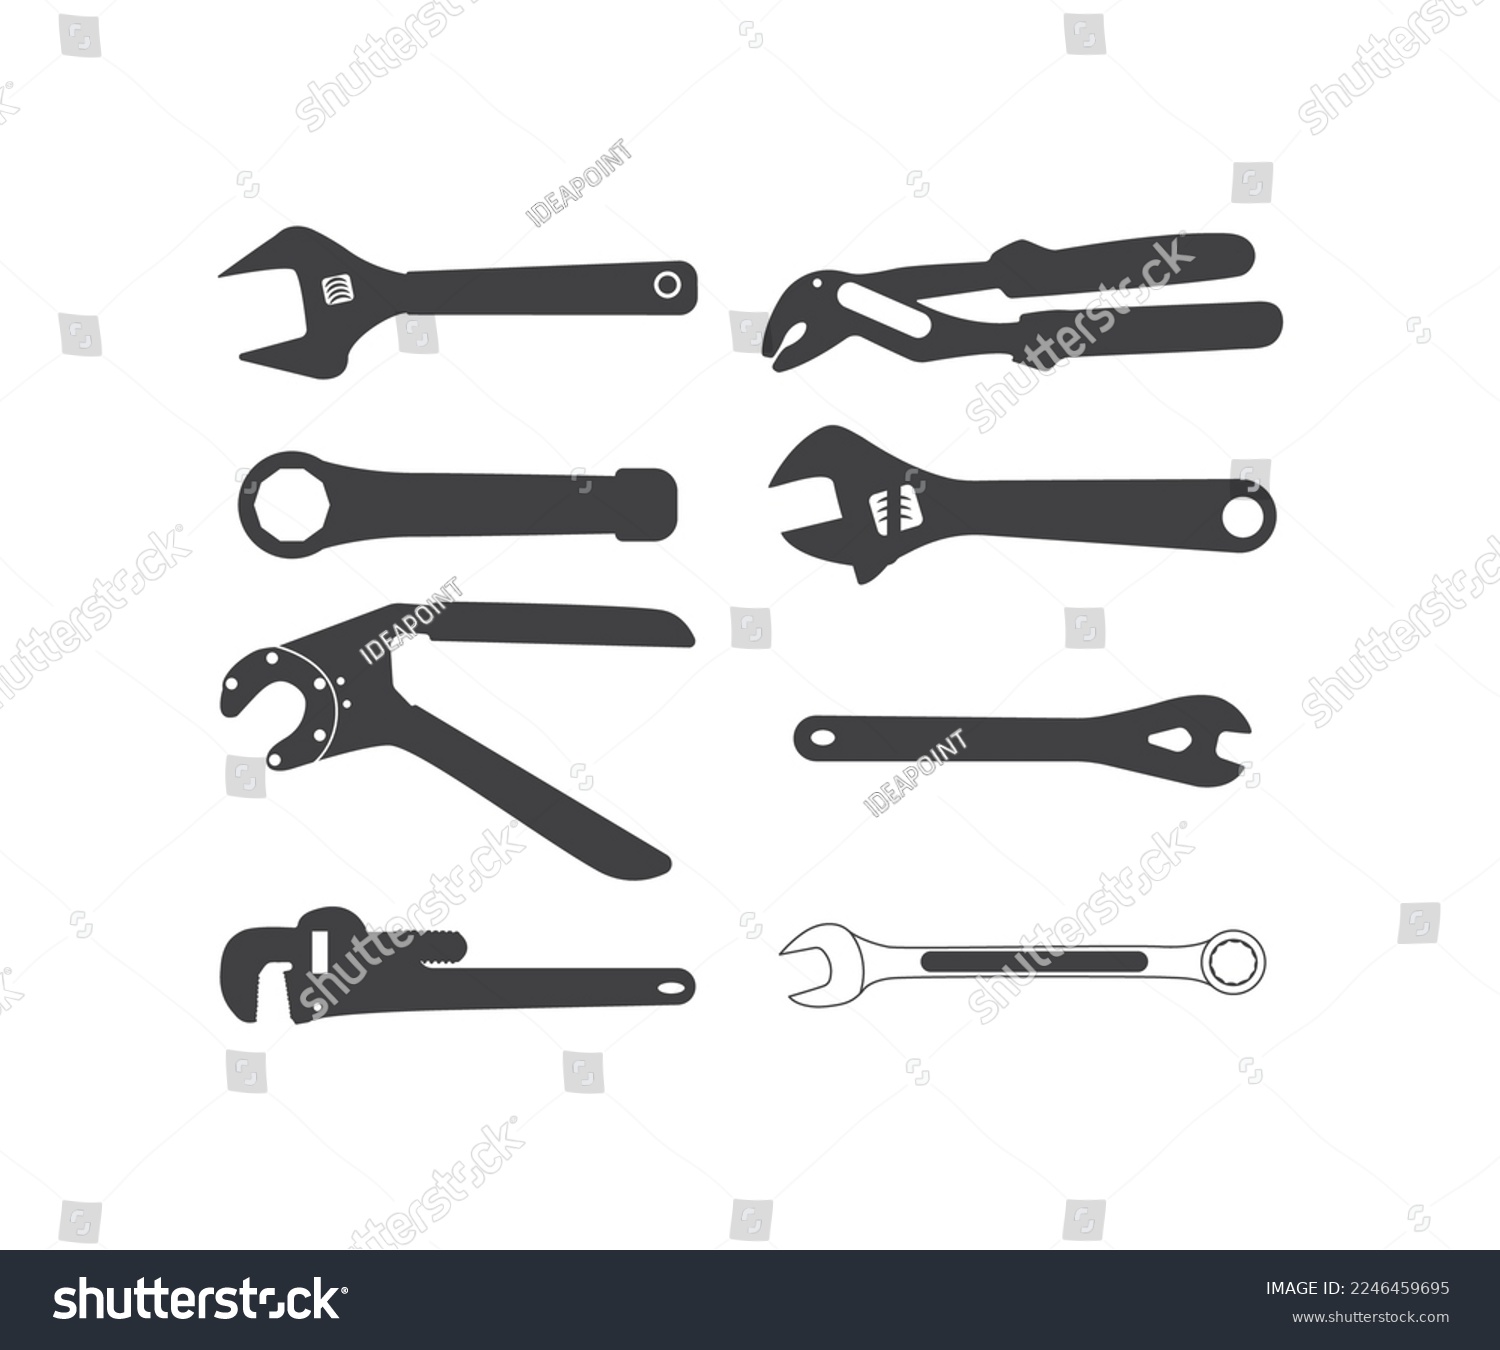 SVG of Spud Wrench svg, Adjustable Wrench Svg, Eps,, Spud Wrench clipart, Cut file, for silhouette, clipart, cricut design space svg